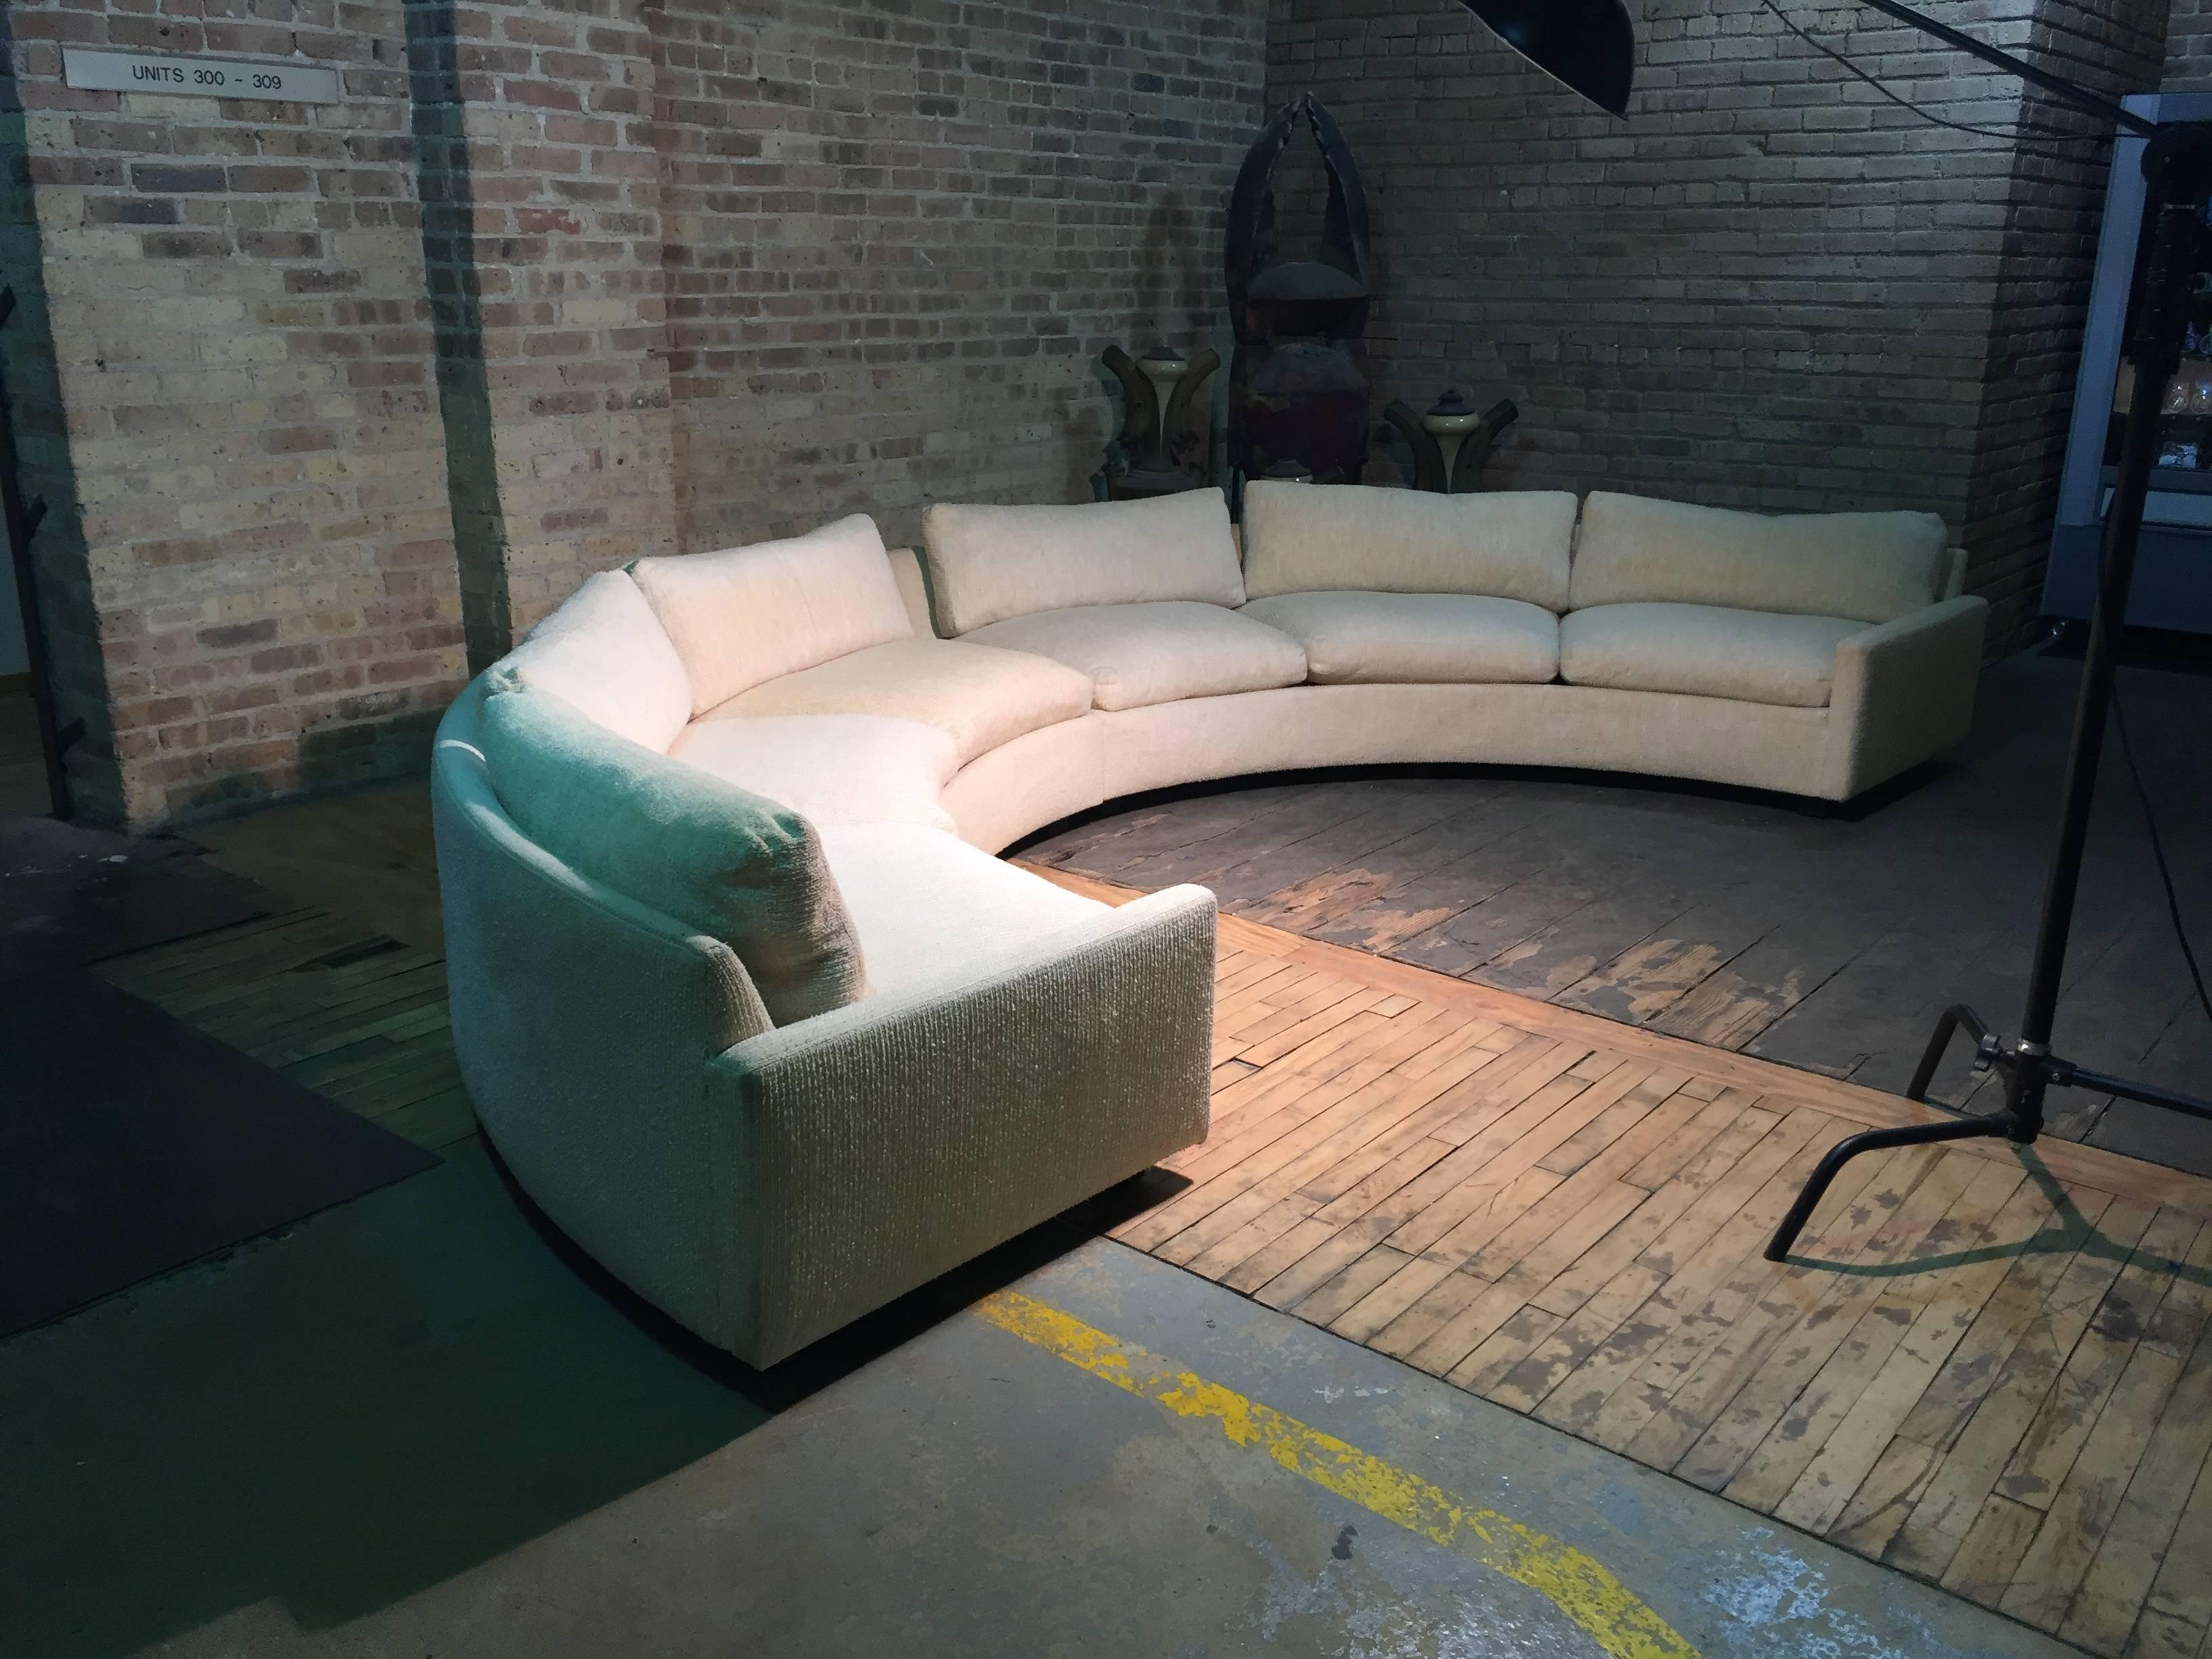 Signed vintage Milo Baughman Thayer Coggin semicircle curve sectional sofa. Dated production tag on underside to 1970s. Condition of fabric is still very nice but a bit stiff. Possibly reupholster or keep original. Some slight yellowing over time